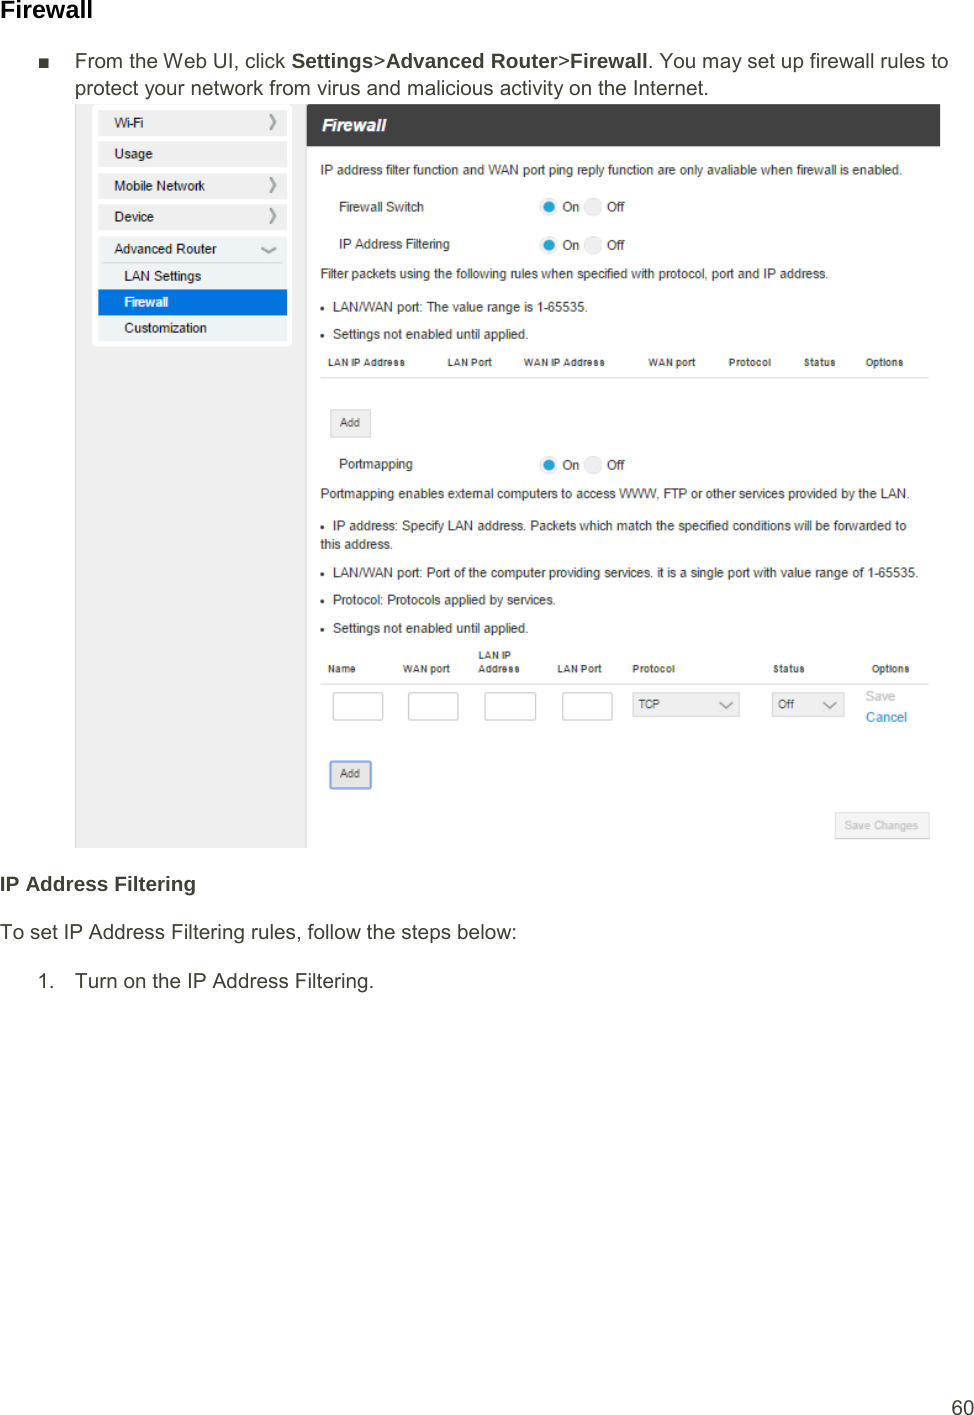  60 Firewall ■ From the Web UI, click Settings&gt;Advanced Router&gt;FirewallIP Address Filtering To set IP Address Filtering rules, follow the steps below: . You may set up firewall rules to protect your network from virus and malicious activity on the Internet.  1. Turn on the IP Address Filtering. 